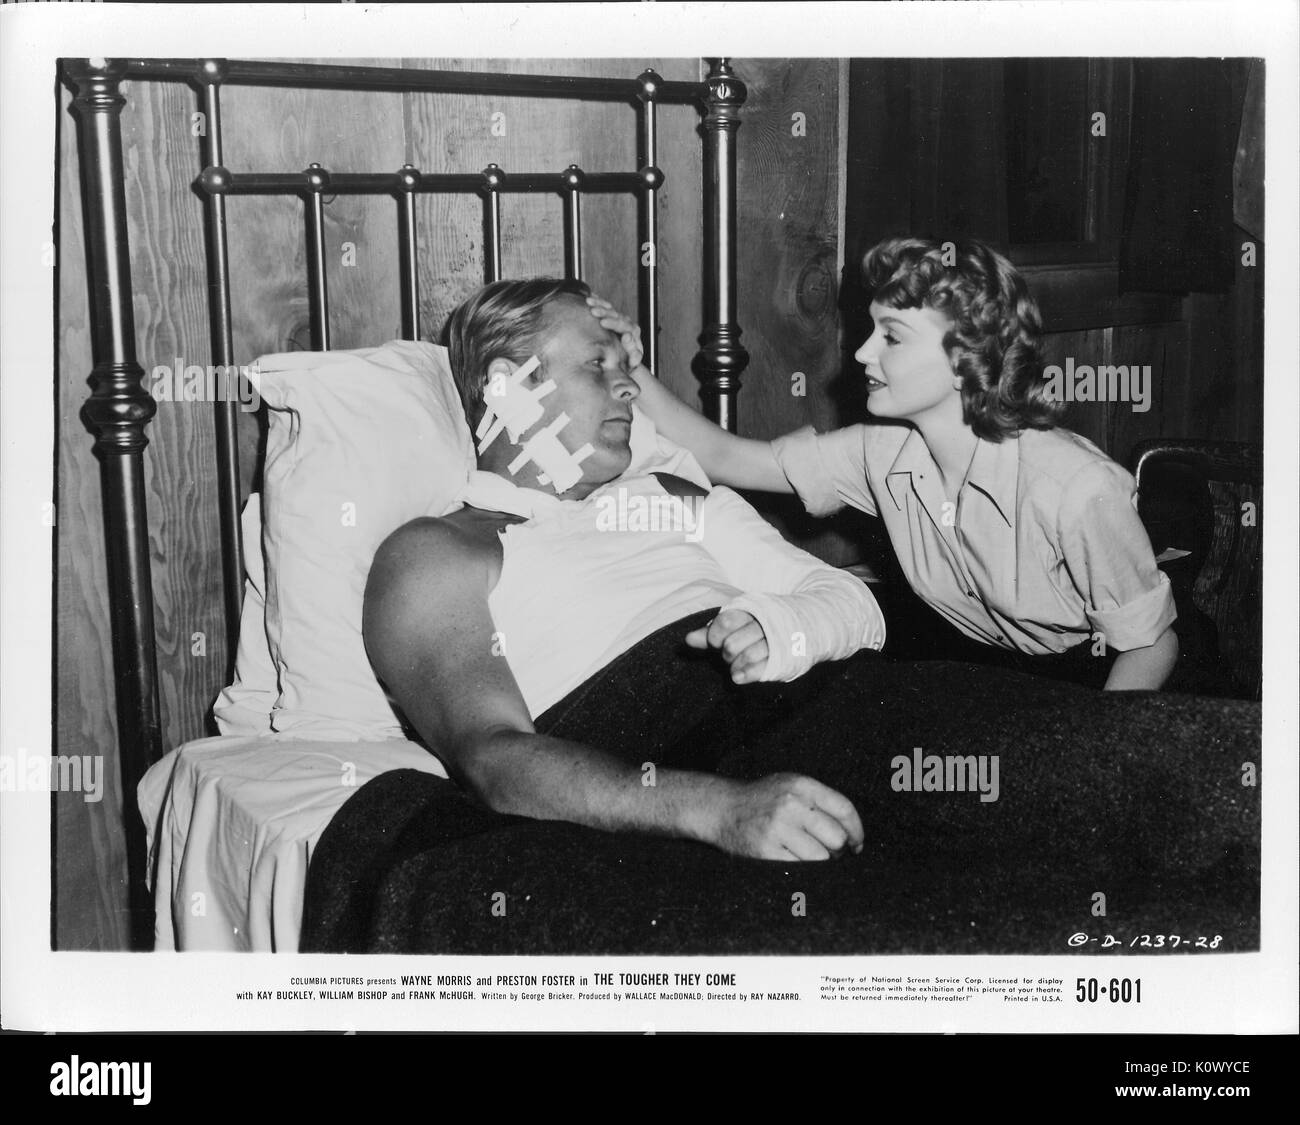 A movie still scene from 'The Tougher They Come' (1950 Columbia Pictures film), showing an injured man with bandages on the left side of his head and his left arm in a cast lying in bed while a young woman puts her right hand on his forehead to check his temperature, 1950. Stock Photo